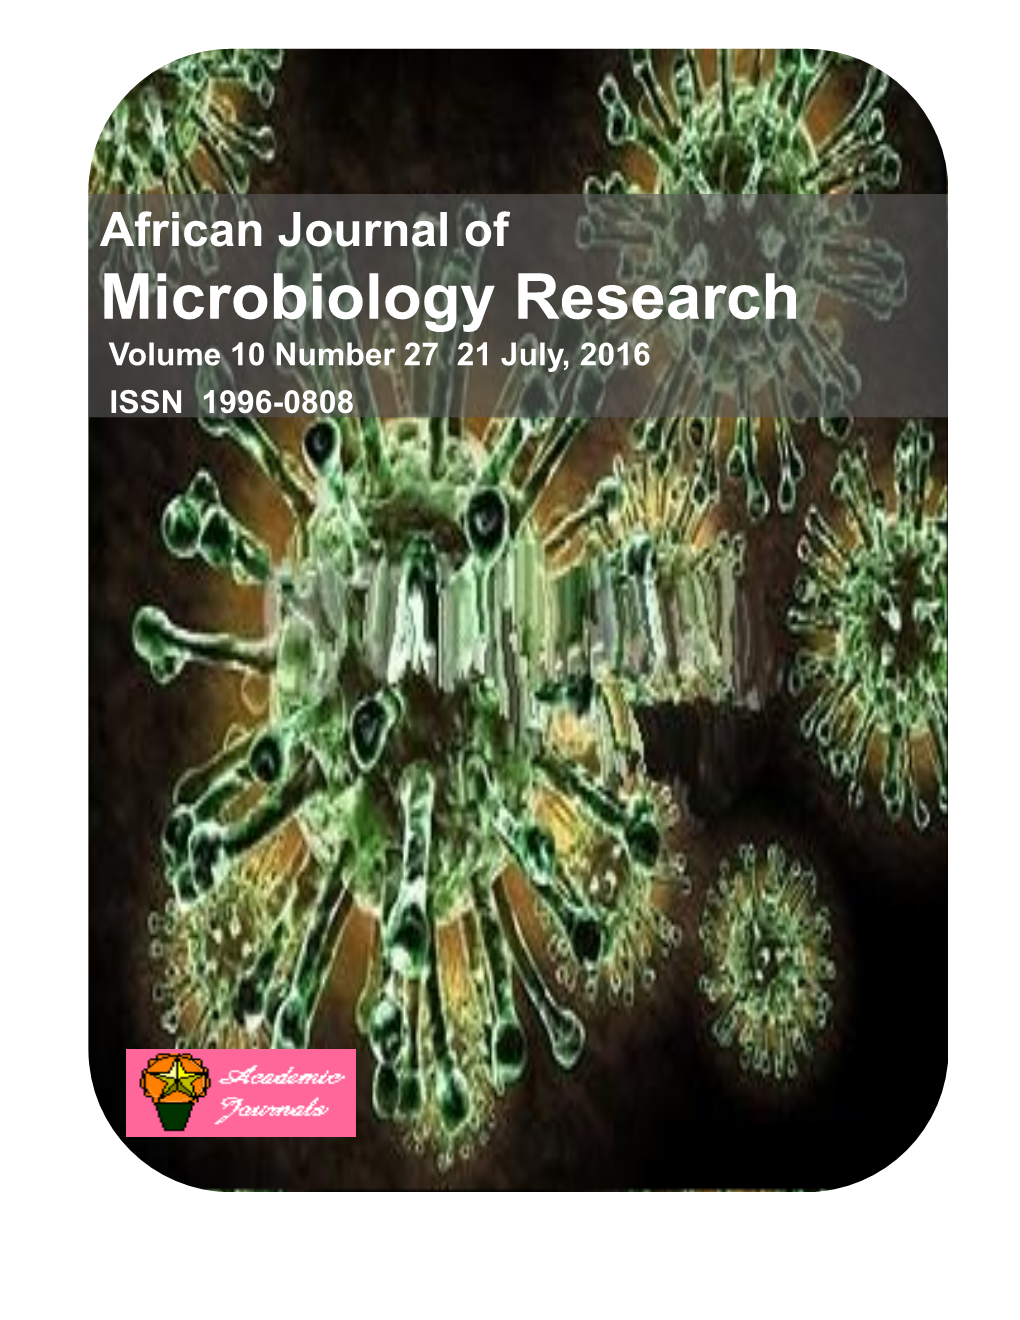 African Journal of Microbiology Research Volume 10 Number 27 21 July, 2016 ISSN 1996-0808